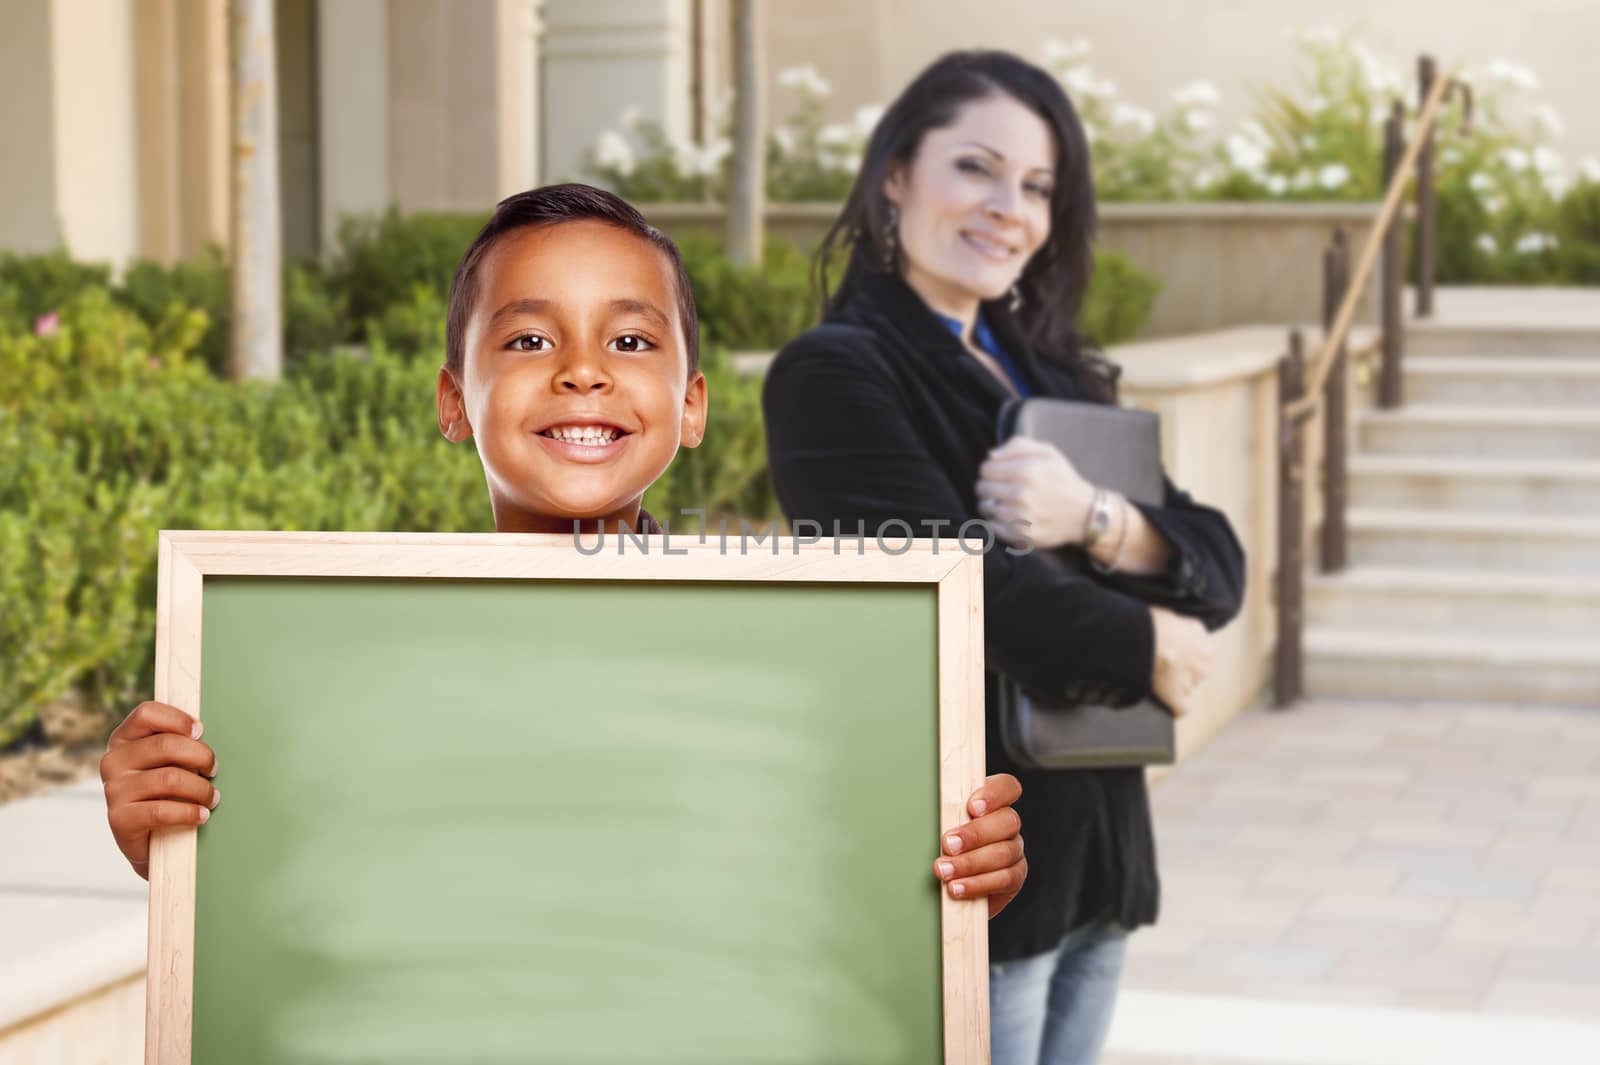 Happy Hispanic Boy Holding Blank Chalk Board on Campus As Teacher Looks on From Behind.